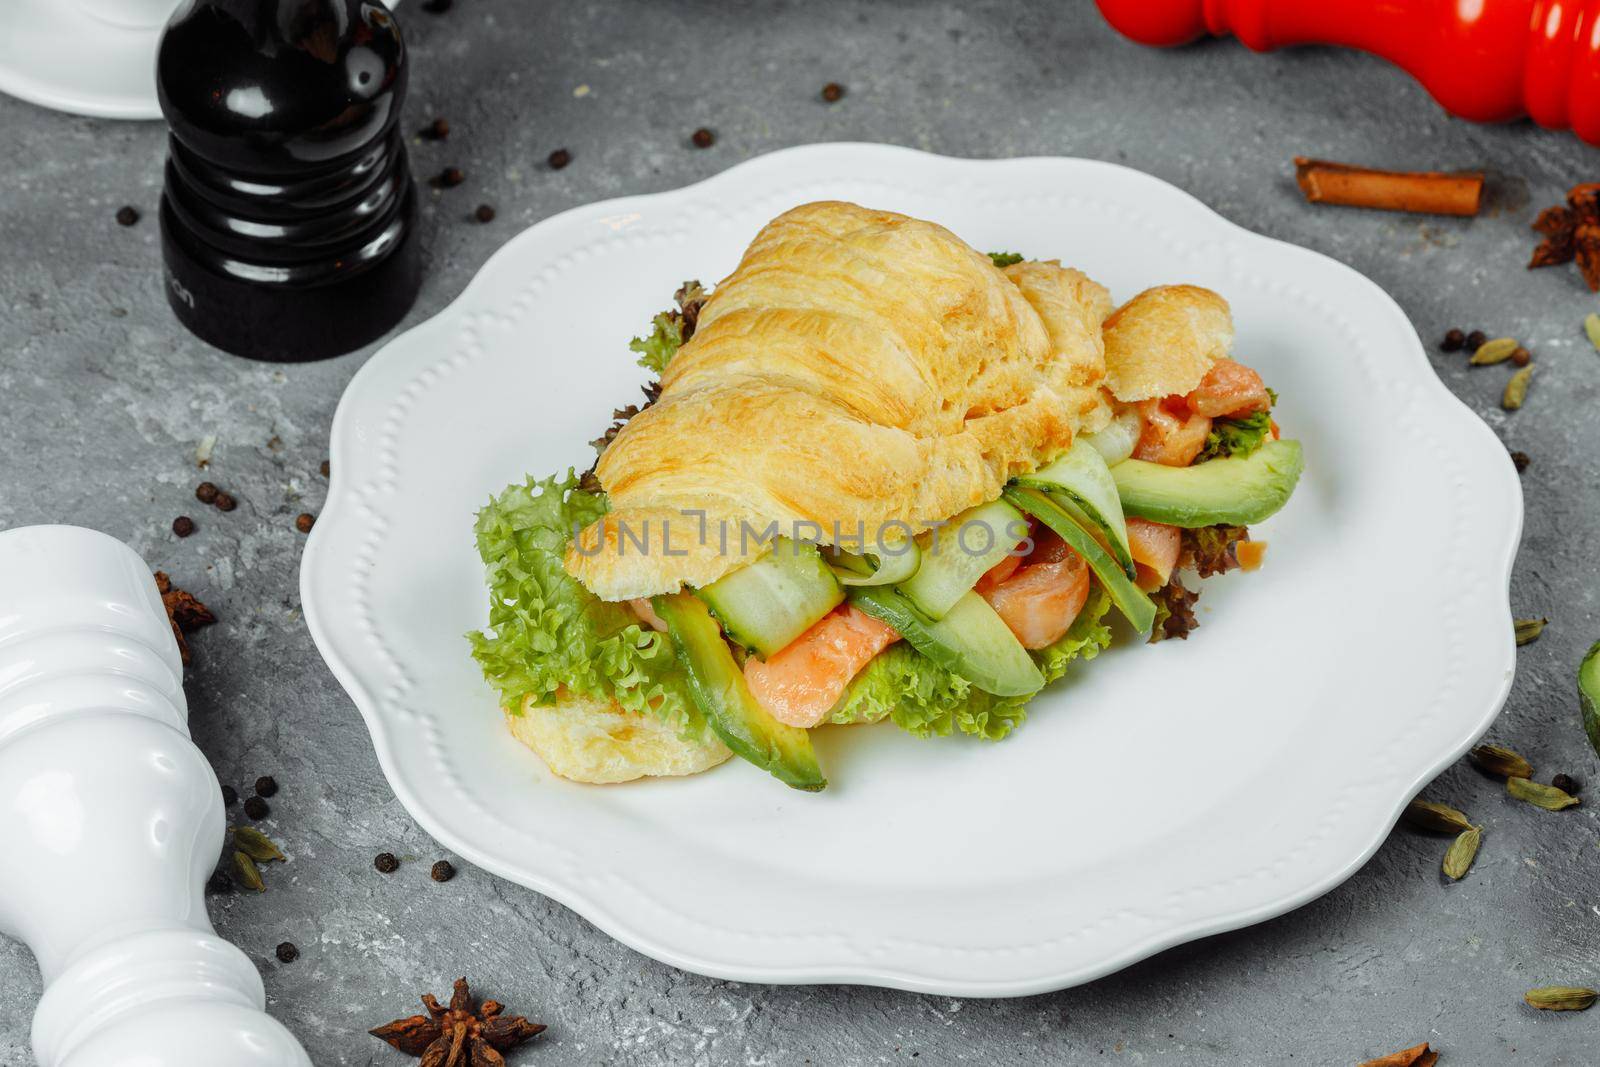 Croissant sandwich with red fish, avocado, fresh vegetables and arugula on black shale board over black stone background. Healthy food concept by UcheaD